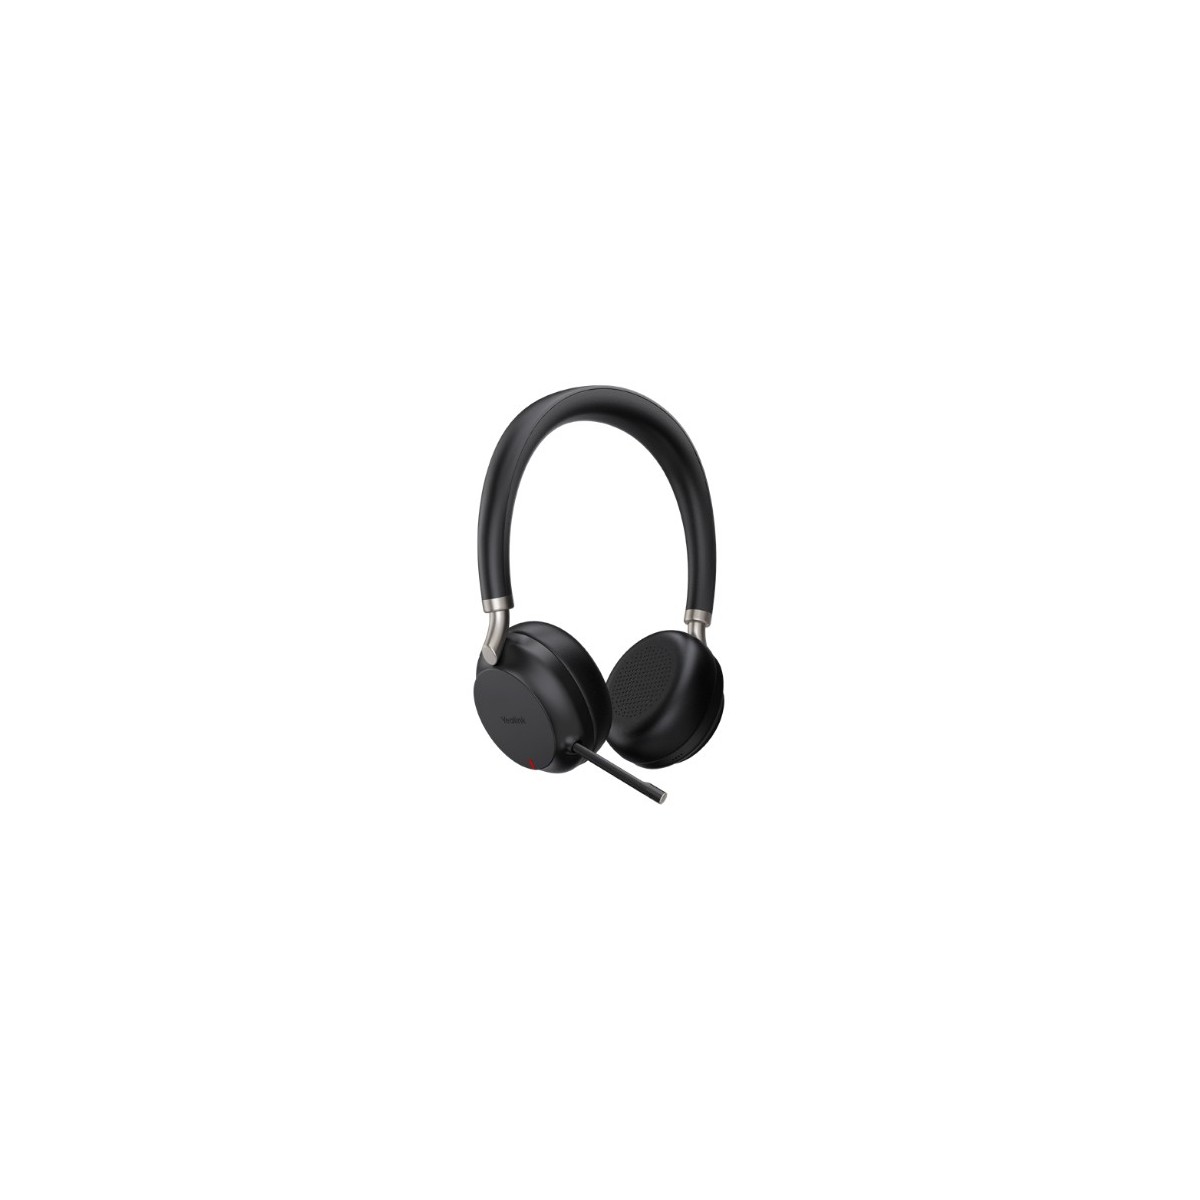 Yealink Bluetooth Headset - BH72 with Charging Stand UC Black USB-C - Headset - Bluetooth